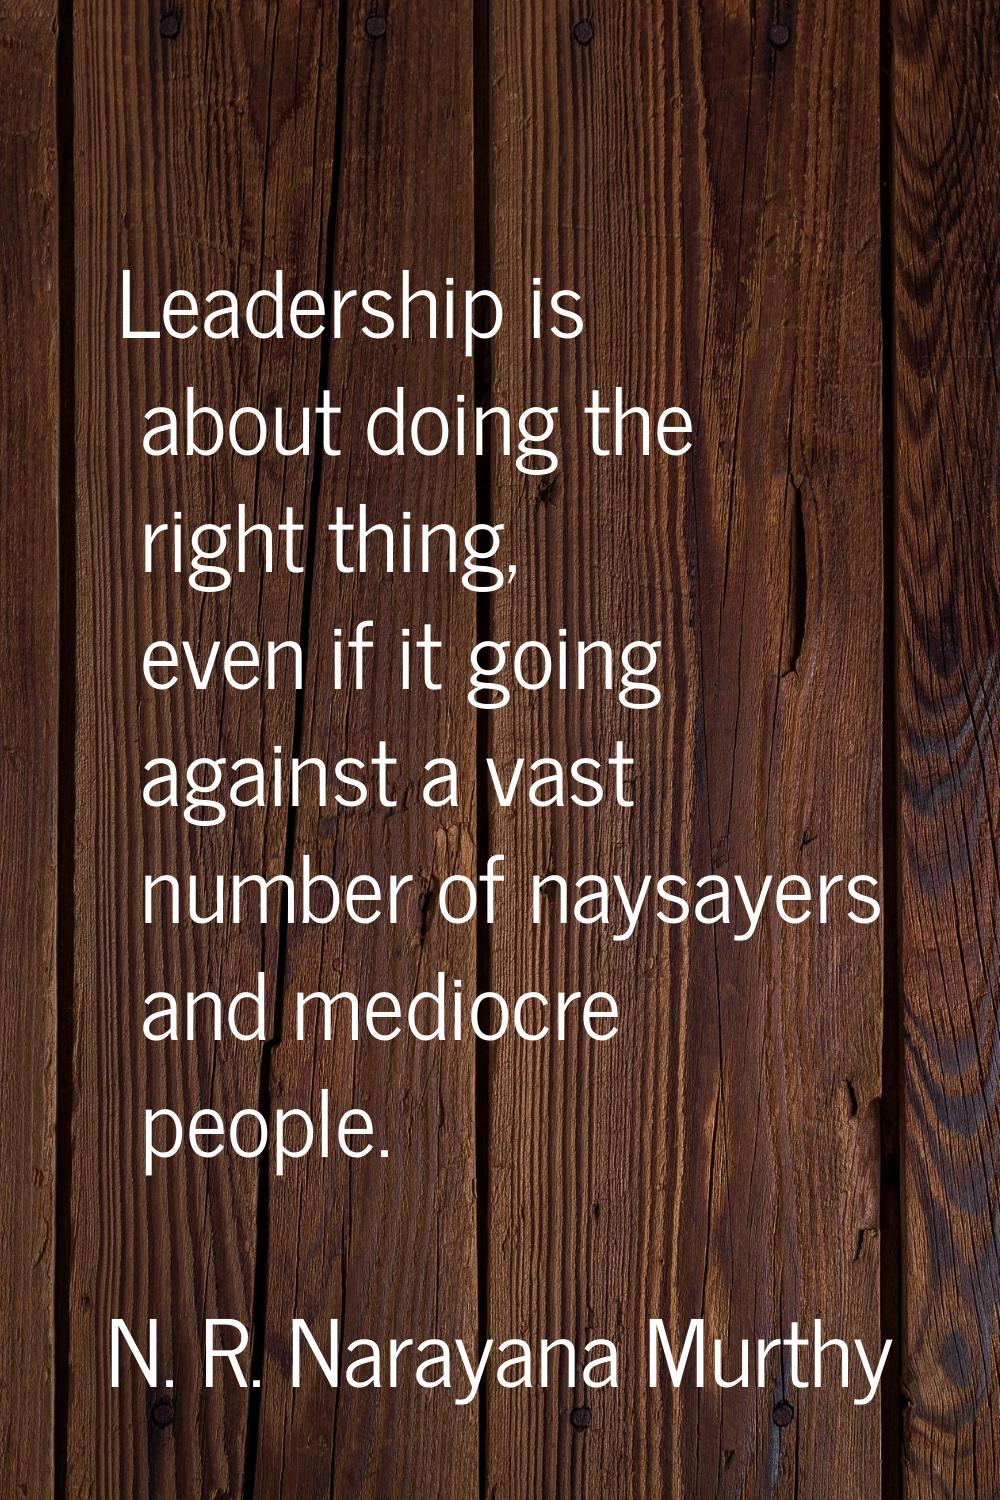 Leadership is about doing the right thing, even if it going against a vast number of naysayers and 